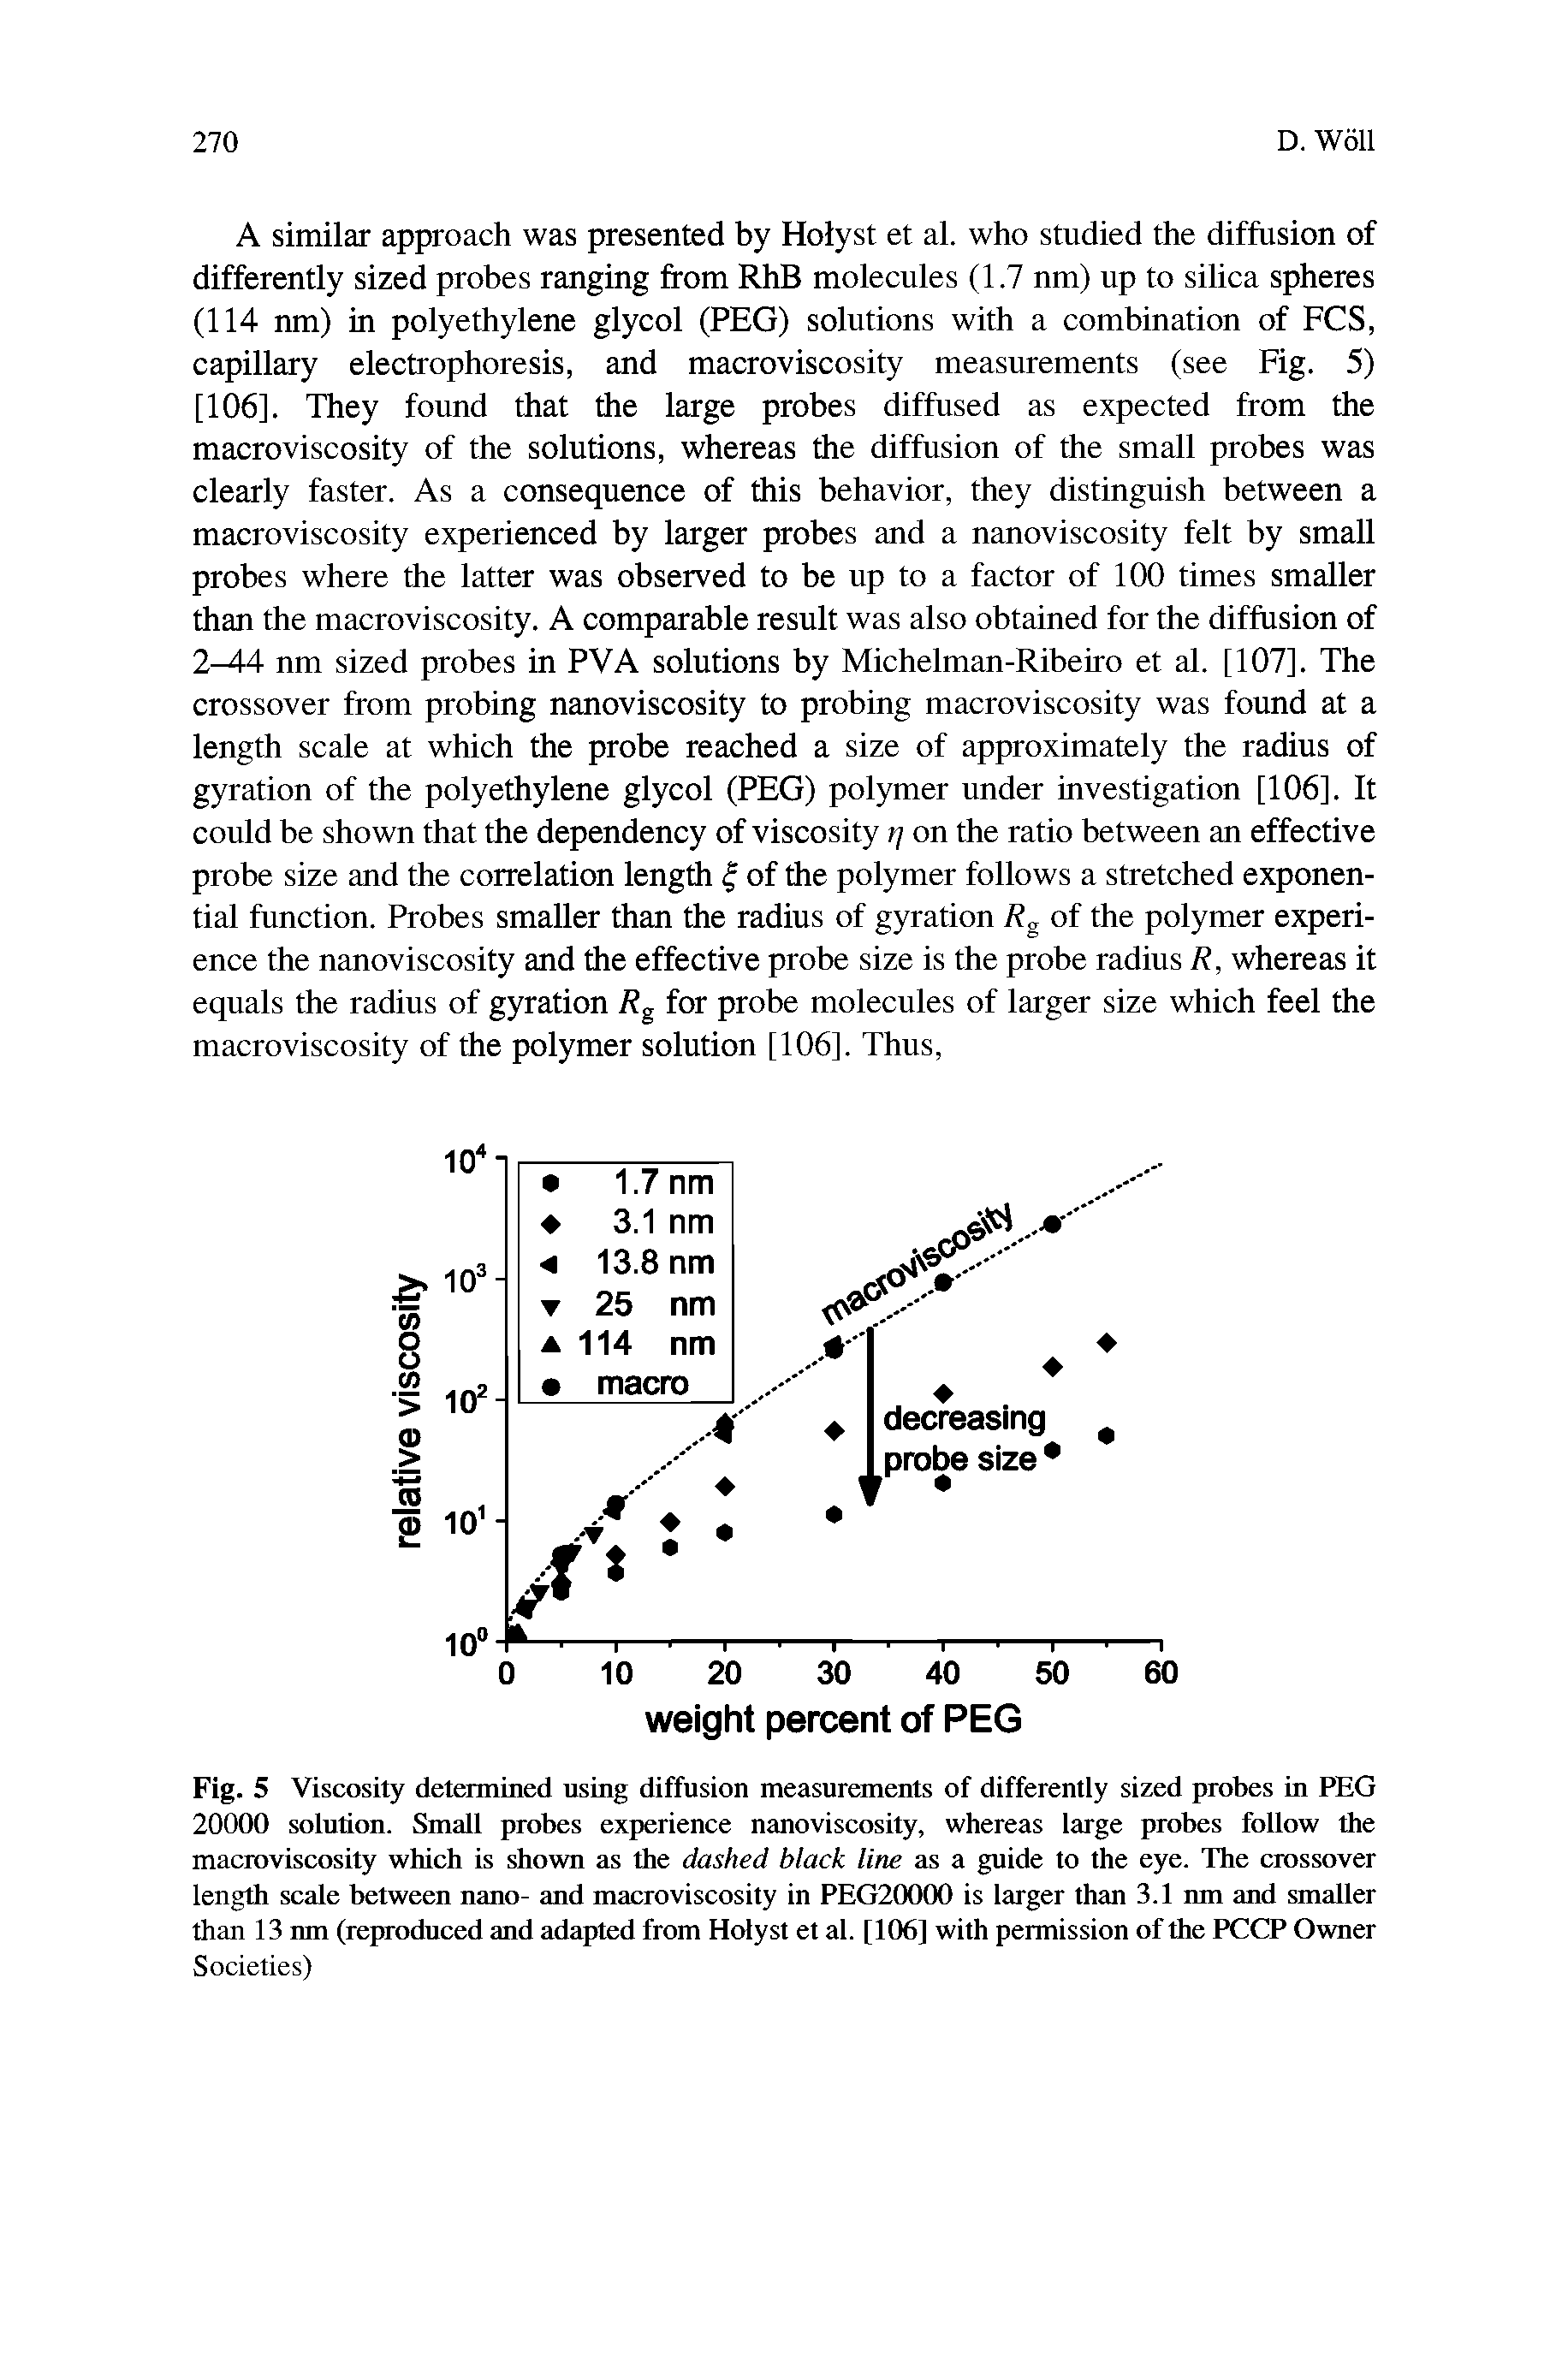 Fig. 5 Viscosity deteraiined using diffusion measurements of differently sized probes in PEG 20000 solution. Small probes experience nanoviscosity, whereas large probes follow the macroviscosity which is shown as the dashed black line as a guide to the eye. The crossover length scale between nano- and macroviscosity in PEG20000 is larger than 3.1 nm and smaller than 13 nm (reproduced and adapted from Holyst et al. [106] with permission of the PCCP Owner Societies)...